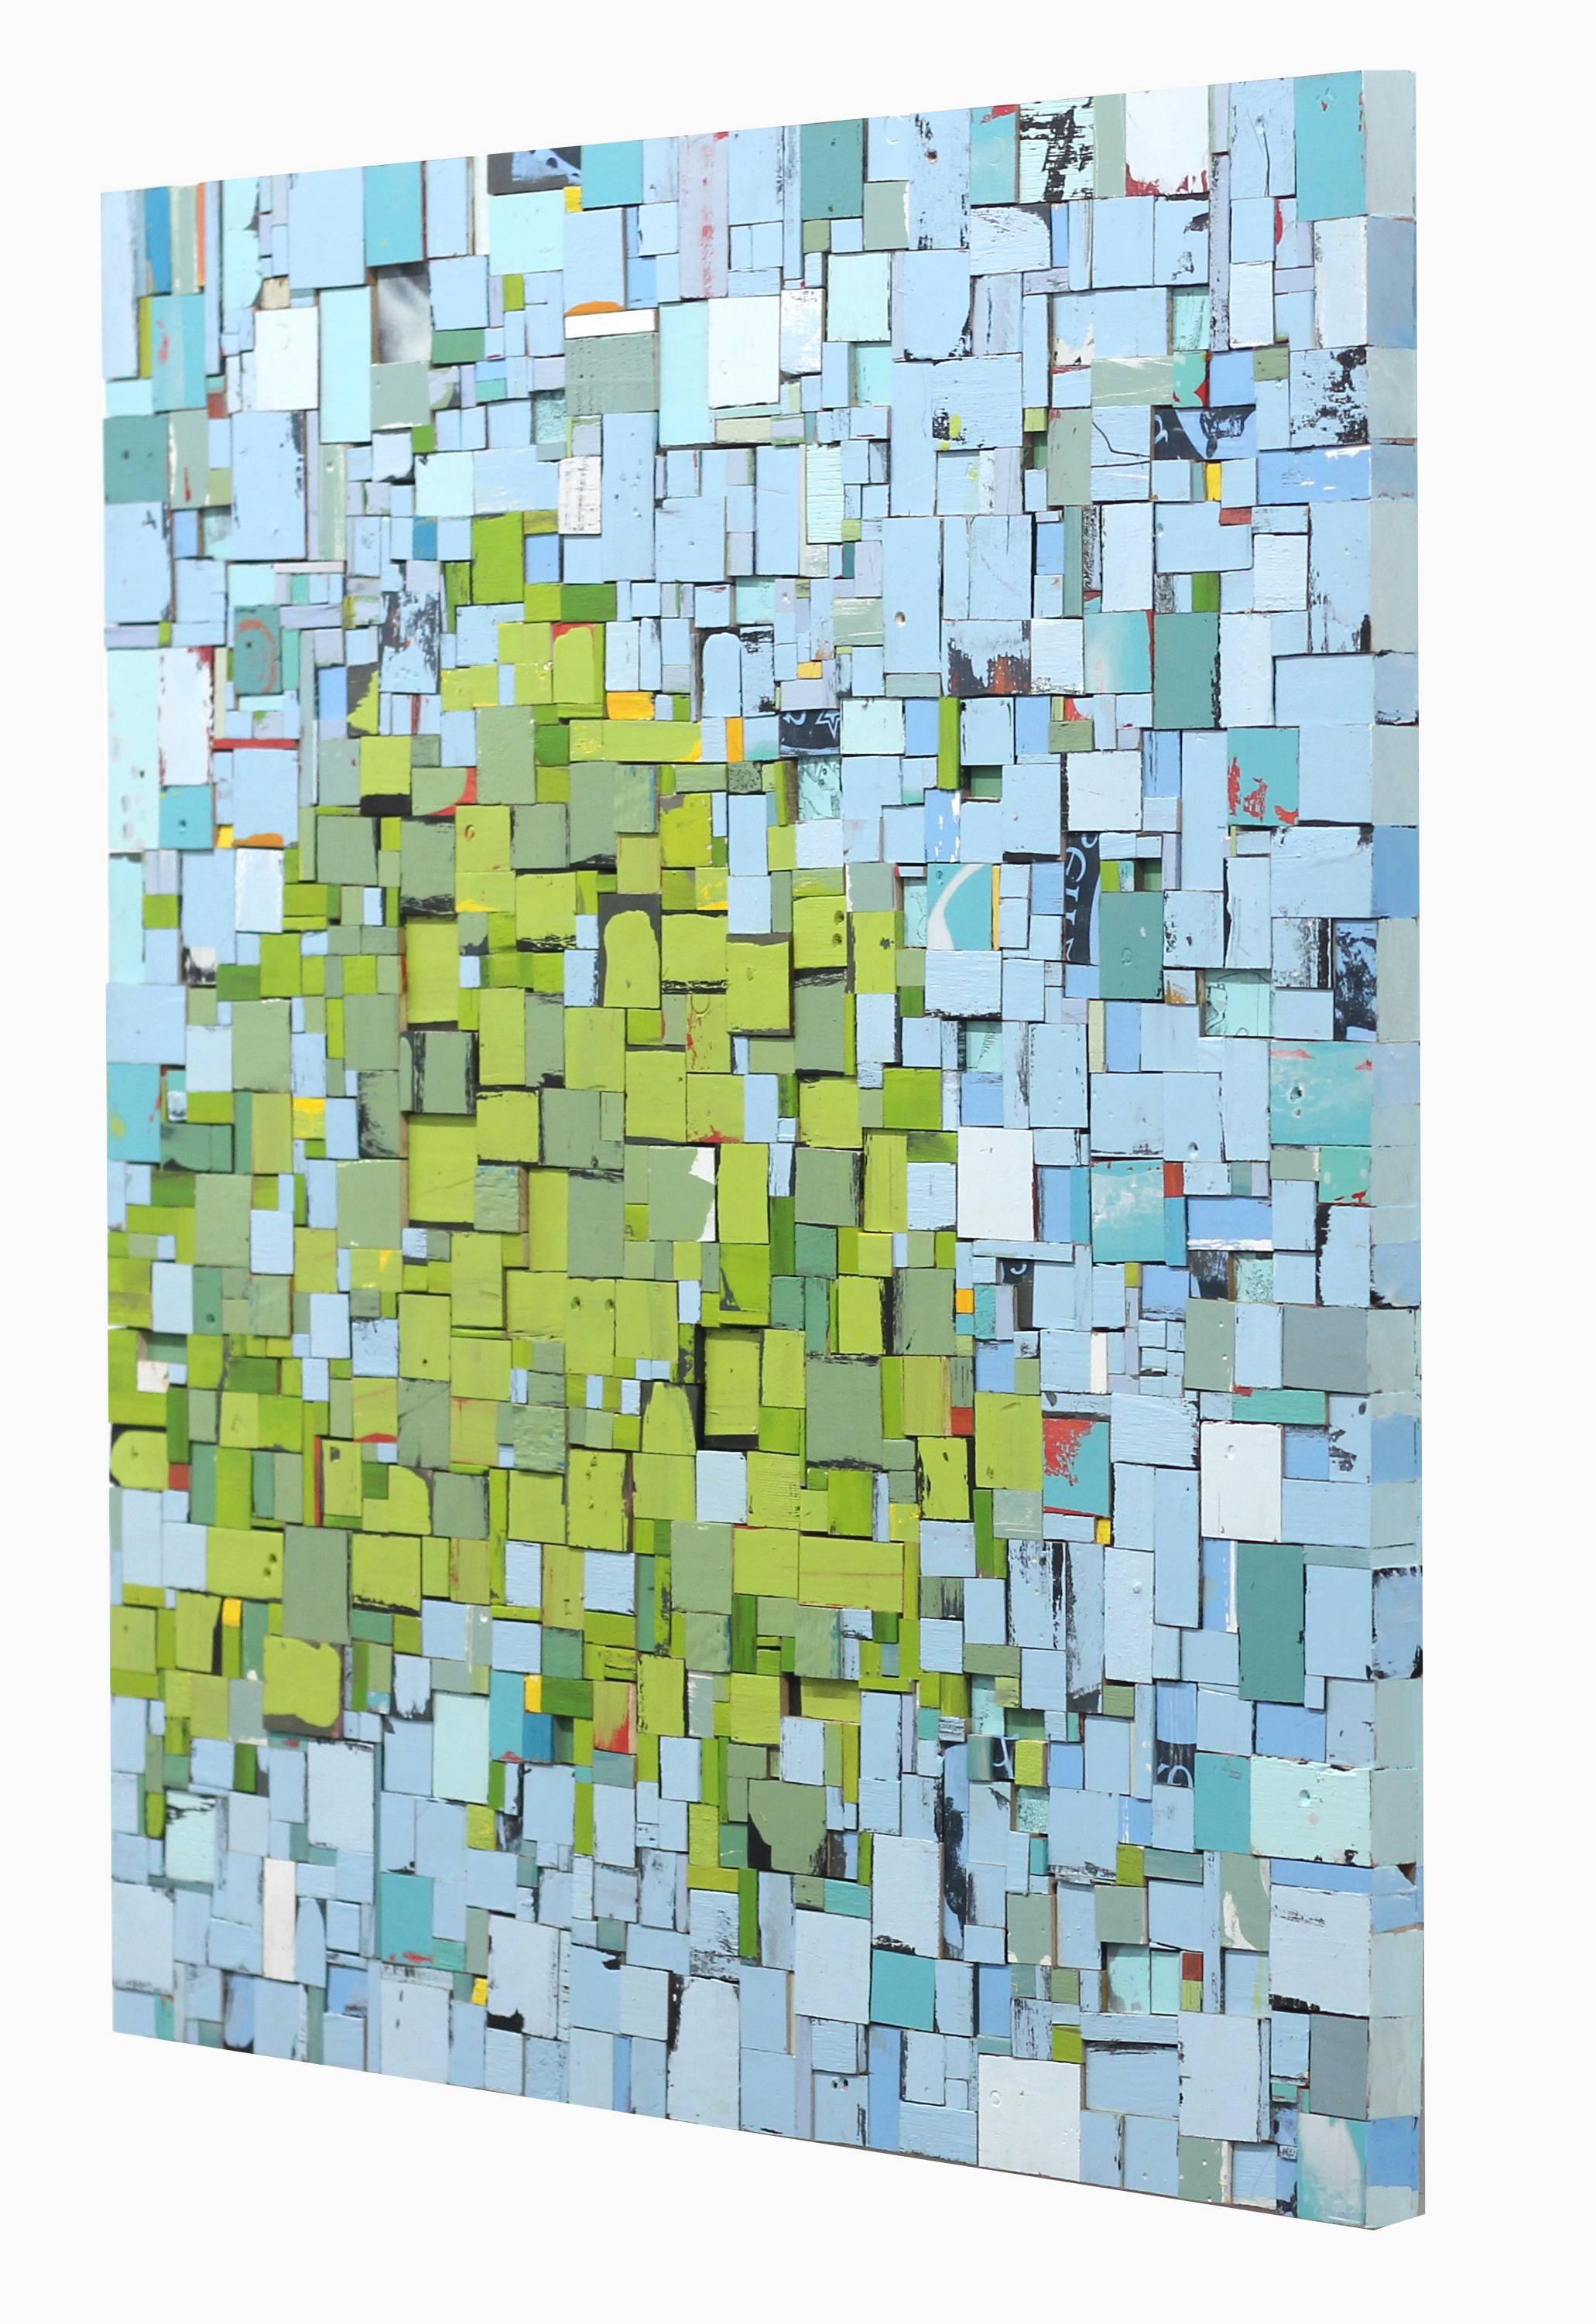 Reflecting on Mary's Lake  - Abstract Geometric Painting by Rebecca Klundt